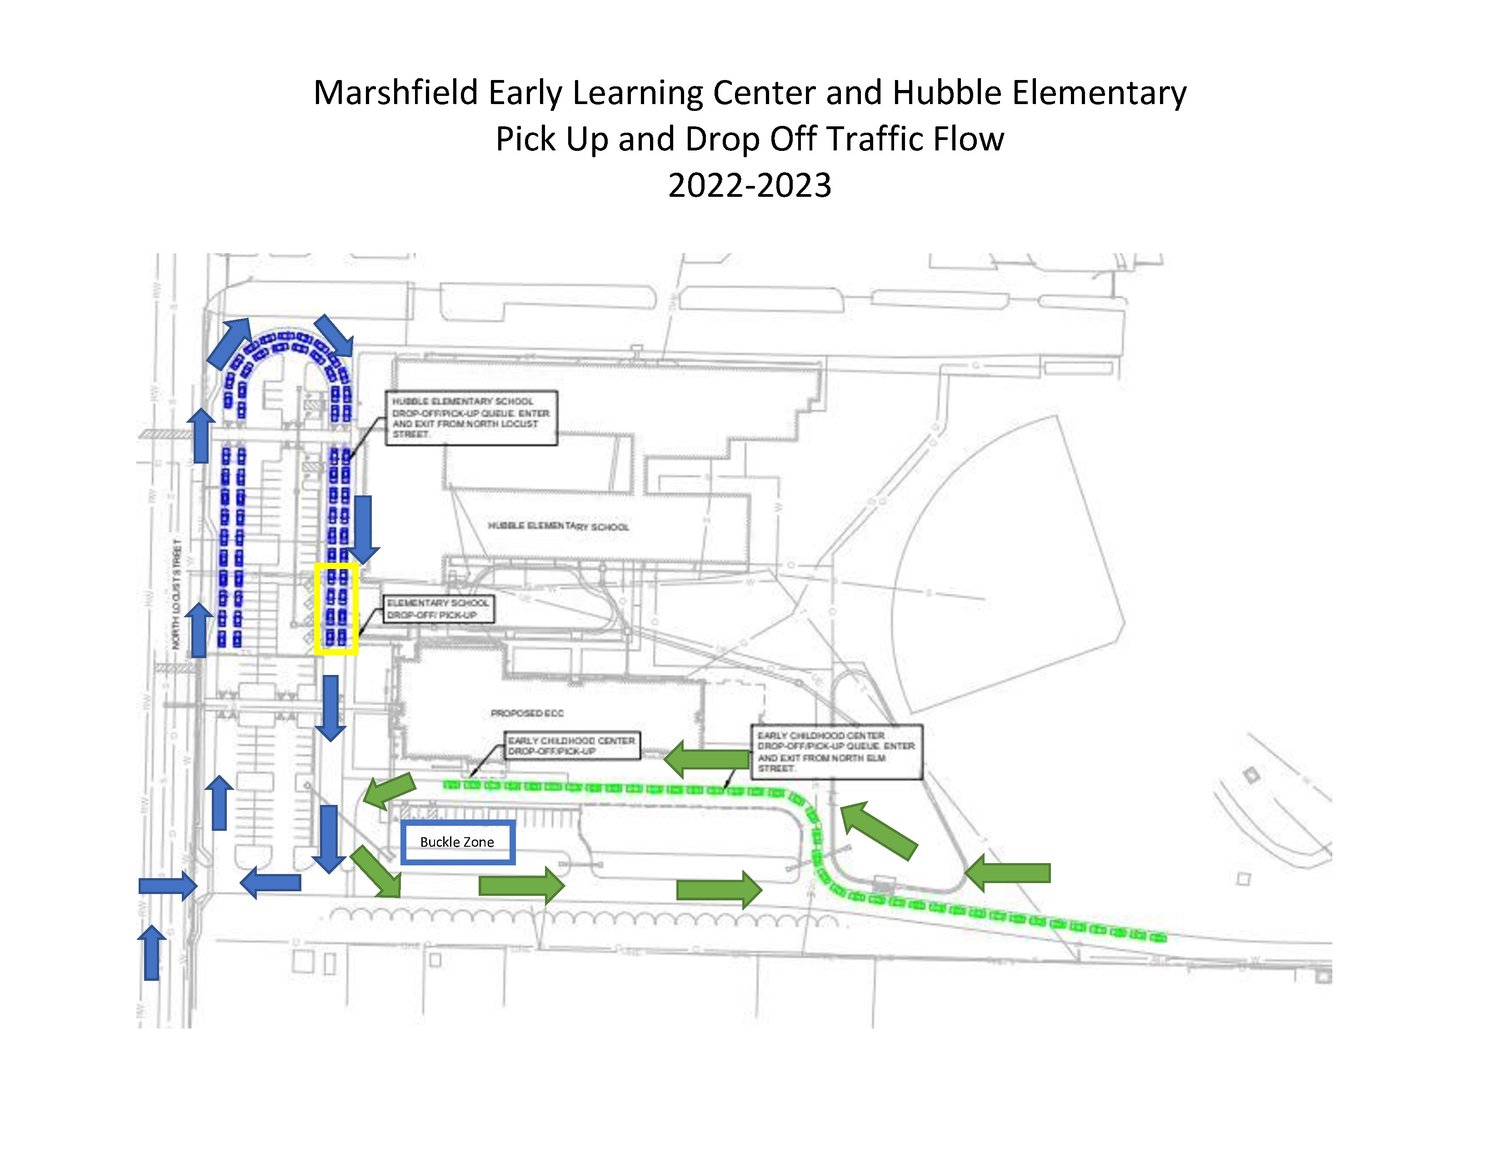 The map instructs parents of Pre-K to 1st-grade students attending the Early Learning Development Center and Hubble Elementary to use the following routes at the start of the school year. If your child is enrolled in Kindergarten or 1st grade, you will use N. Locust Street to pick up/drop off. If your child is enrolled in Pre-K, you will use N. Elm Street to pick up/drop off.